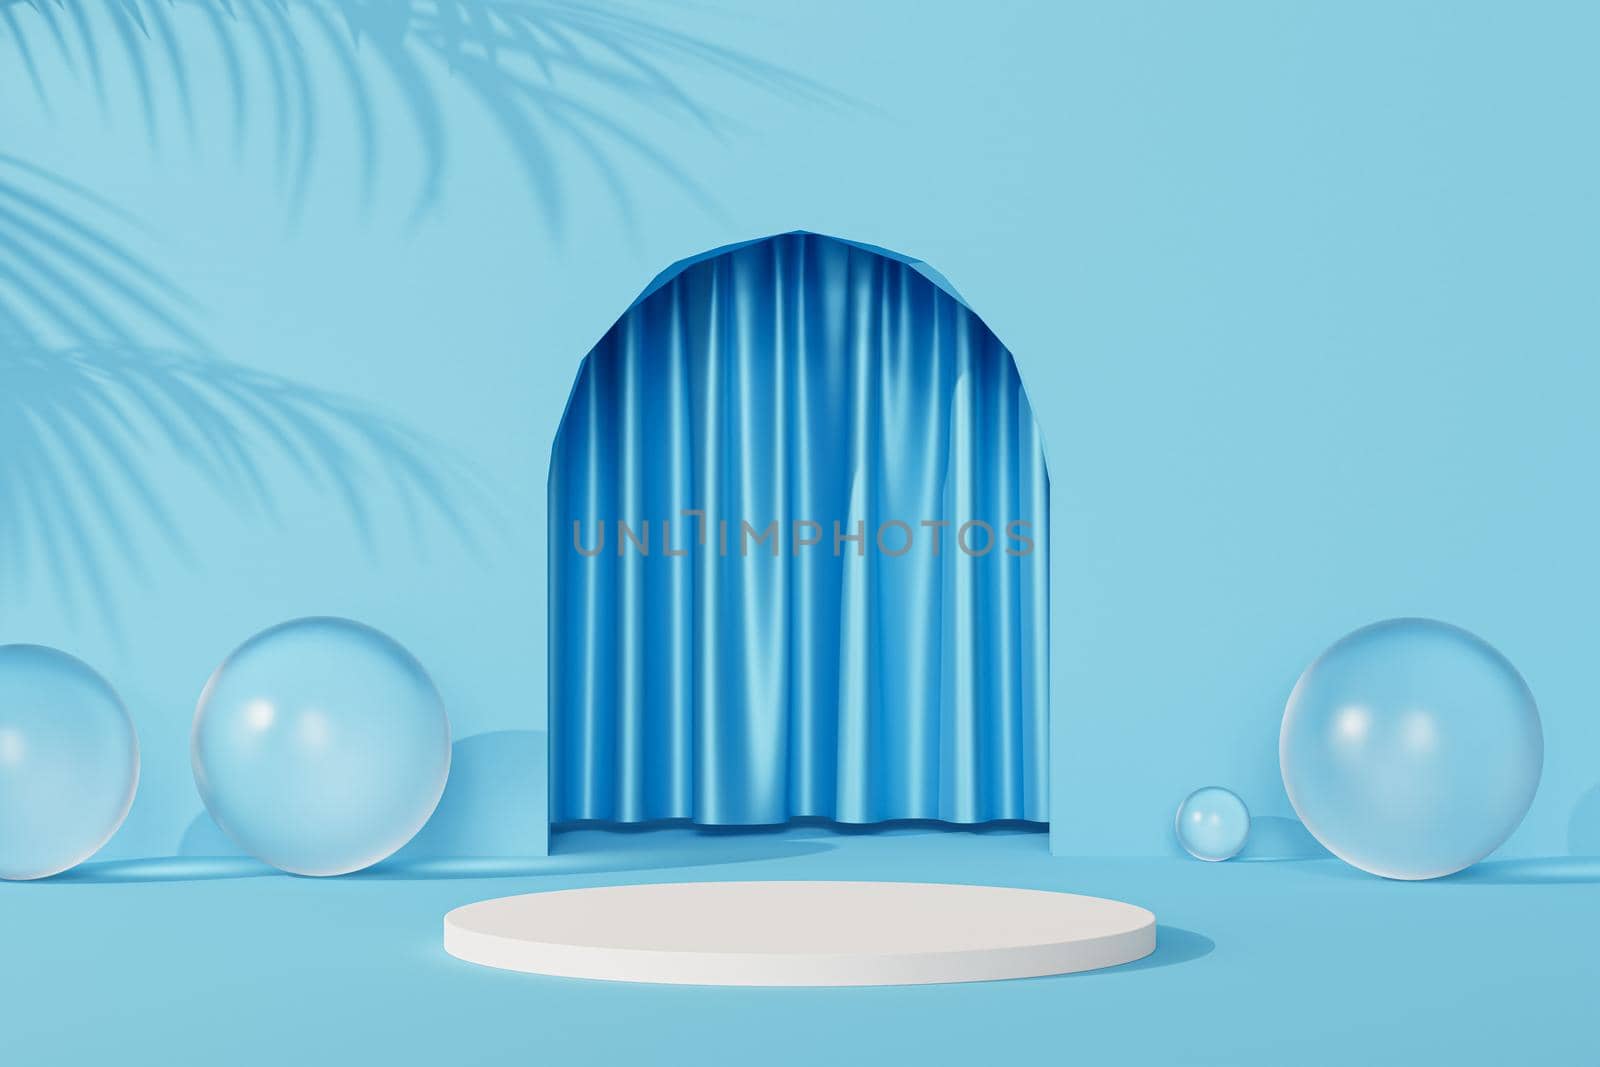 White podium or pedestal for products or advertising near to blue empty entrance with curtains and tropical leaf shadows. 3D minimal rendering.